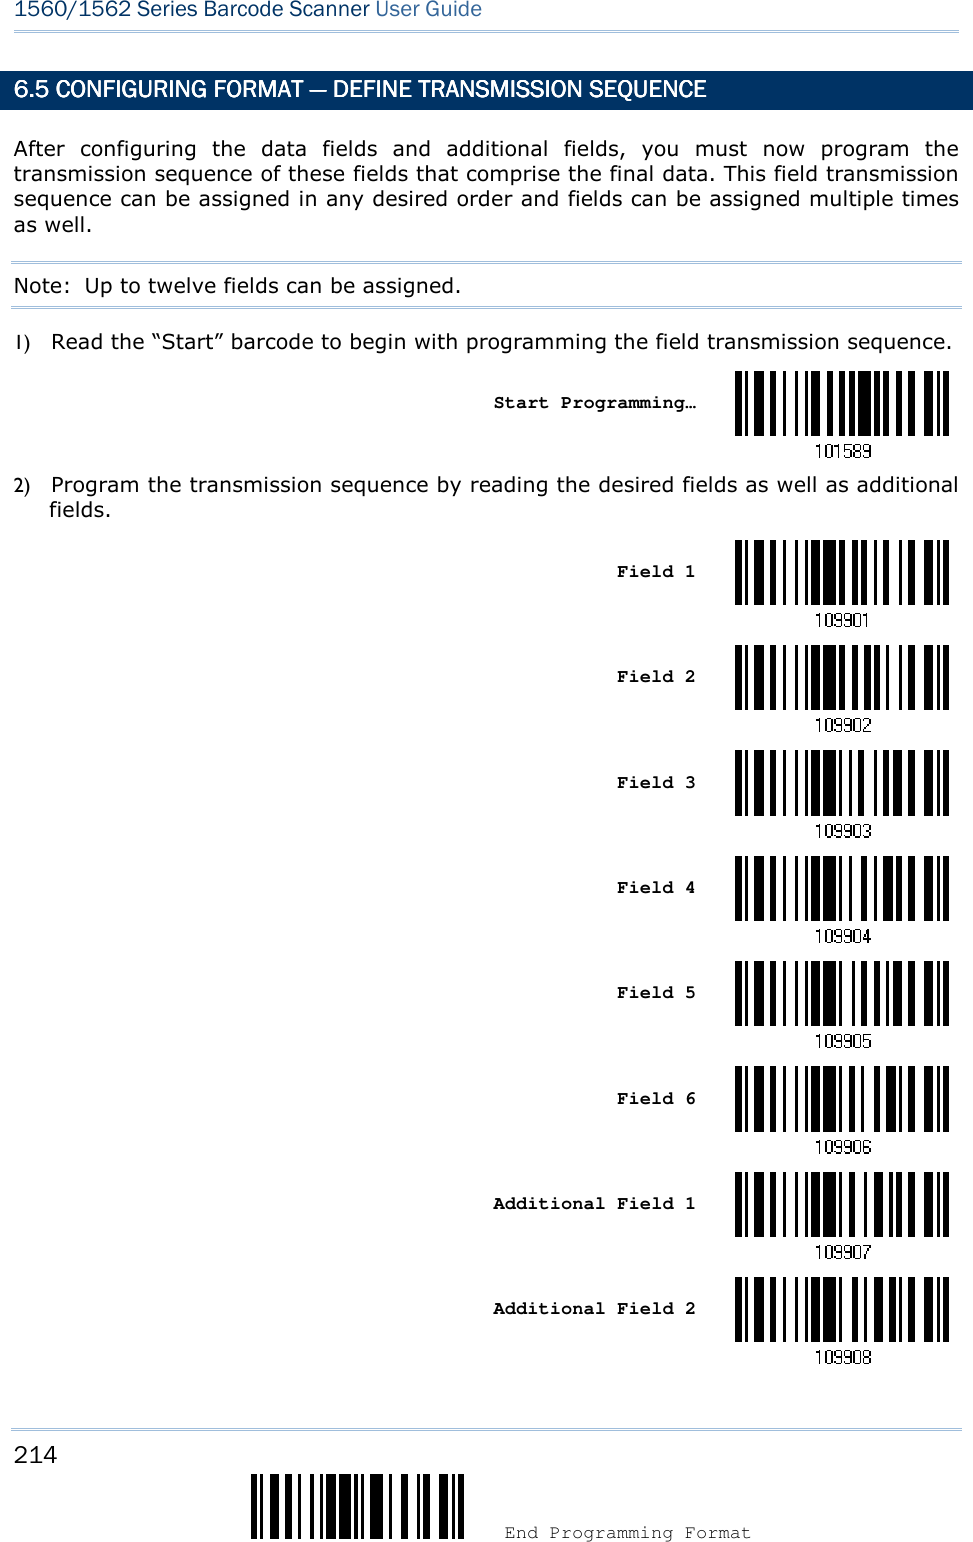 214  End Programming Format 1560/1562 Series Barcode Scanner User Guide  6.5 CONFIGURING FORM6.5 CONFIGURING FORM6.5 CONFIGURING FORM6.5 CONFIGURING FORMAT AT AT AT ————    DEFINE TRANSMISSION DEFINE TRANSMISSION DEFINE TRANSMISSION DEFINE TRANSMISSION SEQUENCESEQUENCESEQUENCESEQUENCE    After  configuring  the  data  fields  and  additional  fields,  you  must  now  program  the transmission sequence of these fields that comprise the final data. This field transmission sequence can be assigned in any desired order and fields can be assigned multiple times as well.   Note:  Up to twelve fields can be assigned. 1) Read the “Start” barcode to begin with programming the field transmission sequence.    Start Programming…  2) Program the transmission sequence by reading the desired fields as well as additional fields.    Field 1     Field 2     Field 3     Field 4     Field 5     Field 6     Additional Field 1     Additional Field 2  